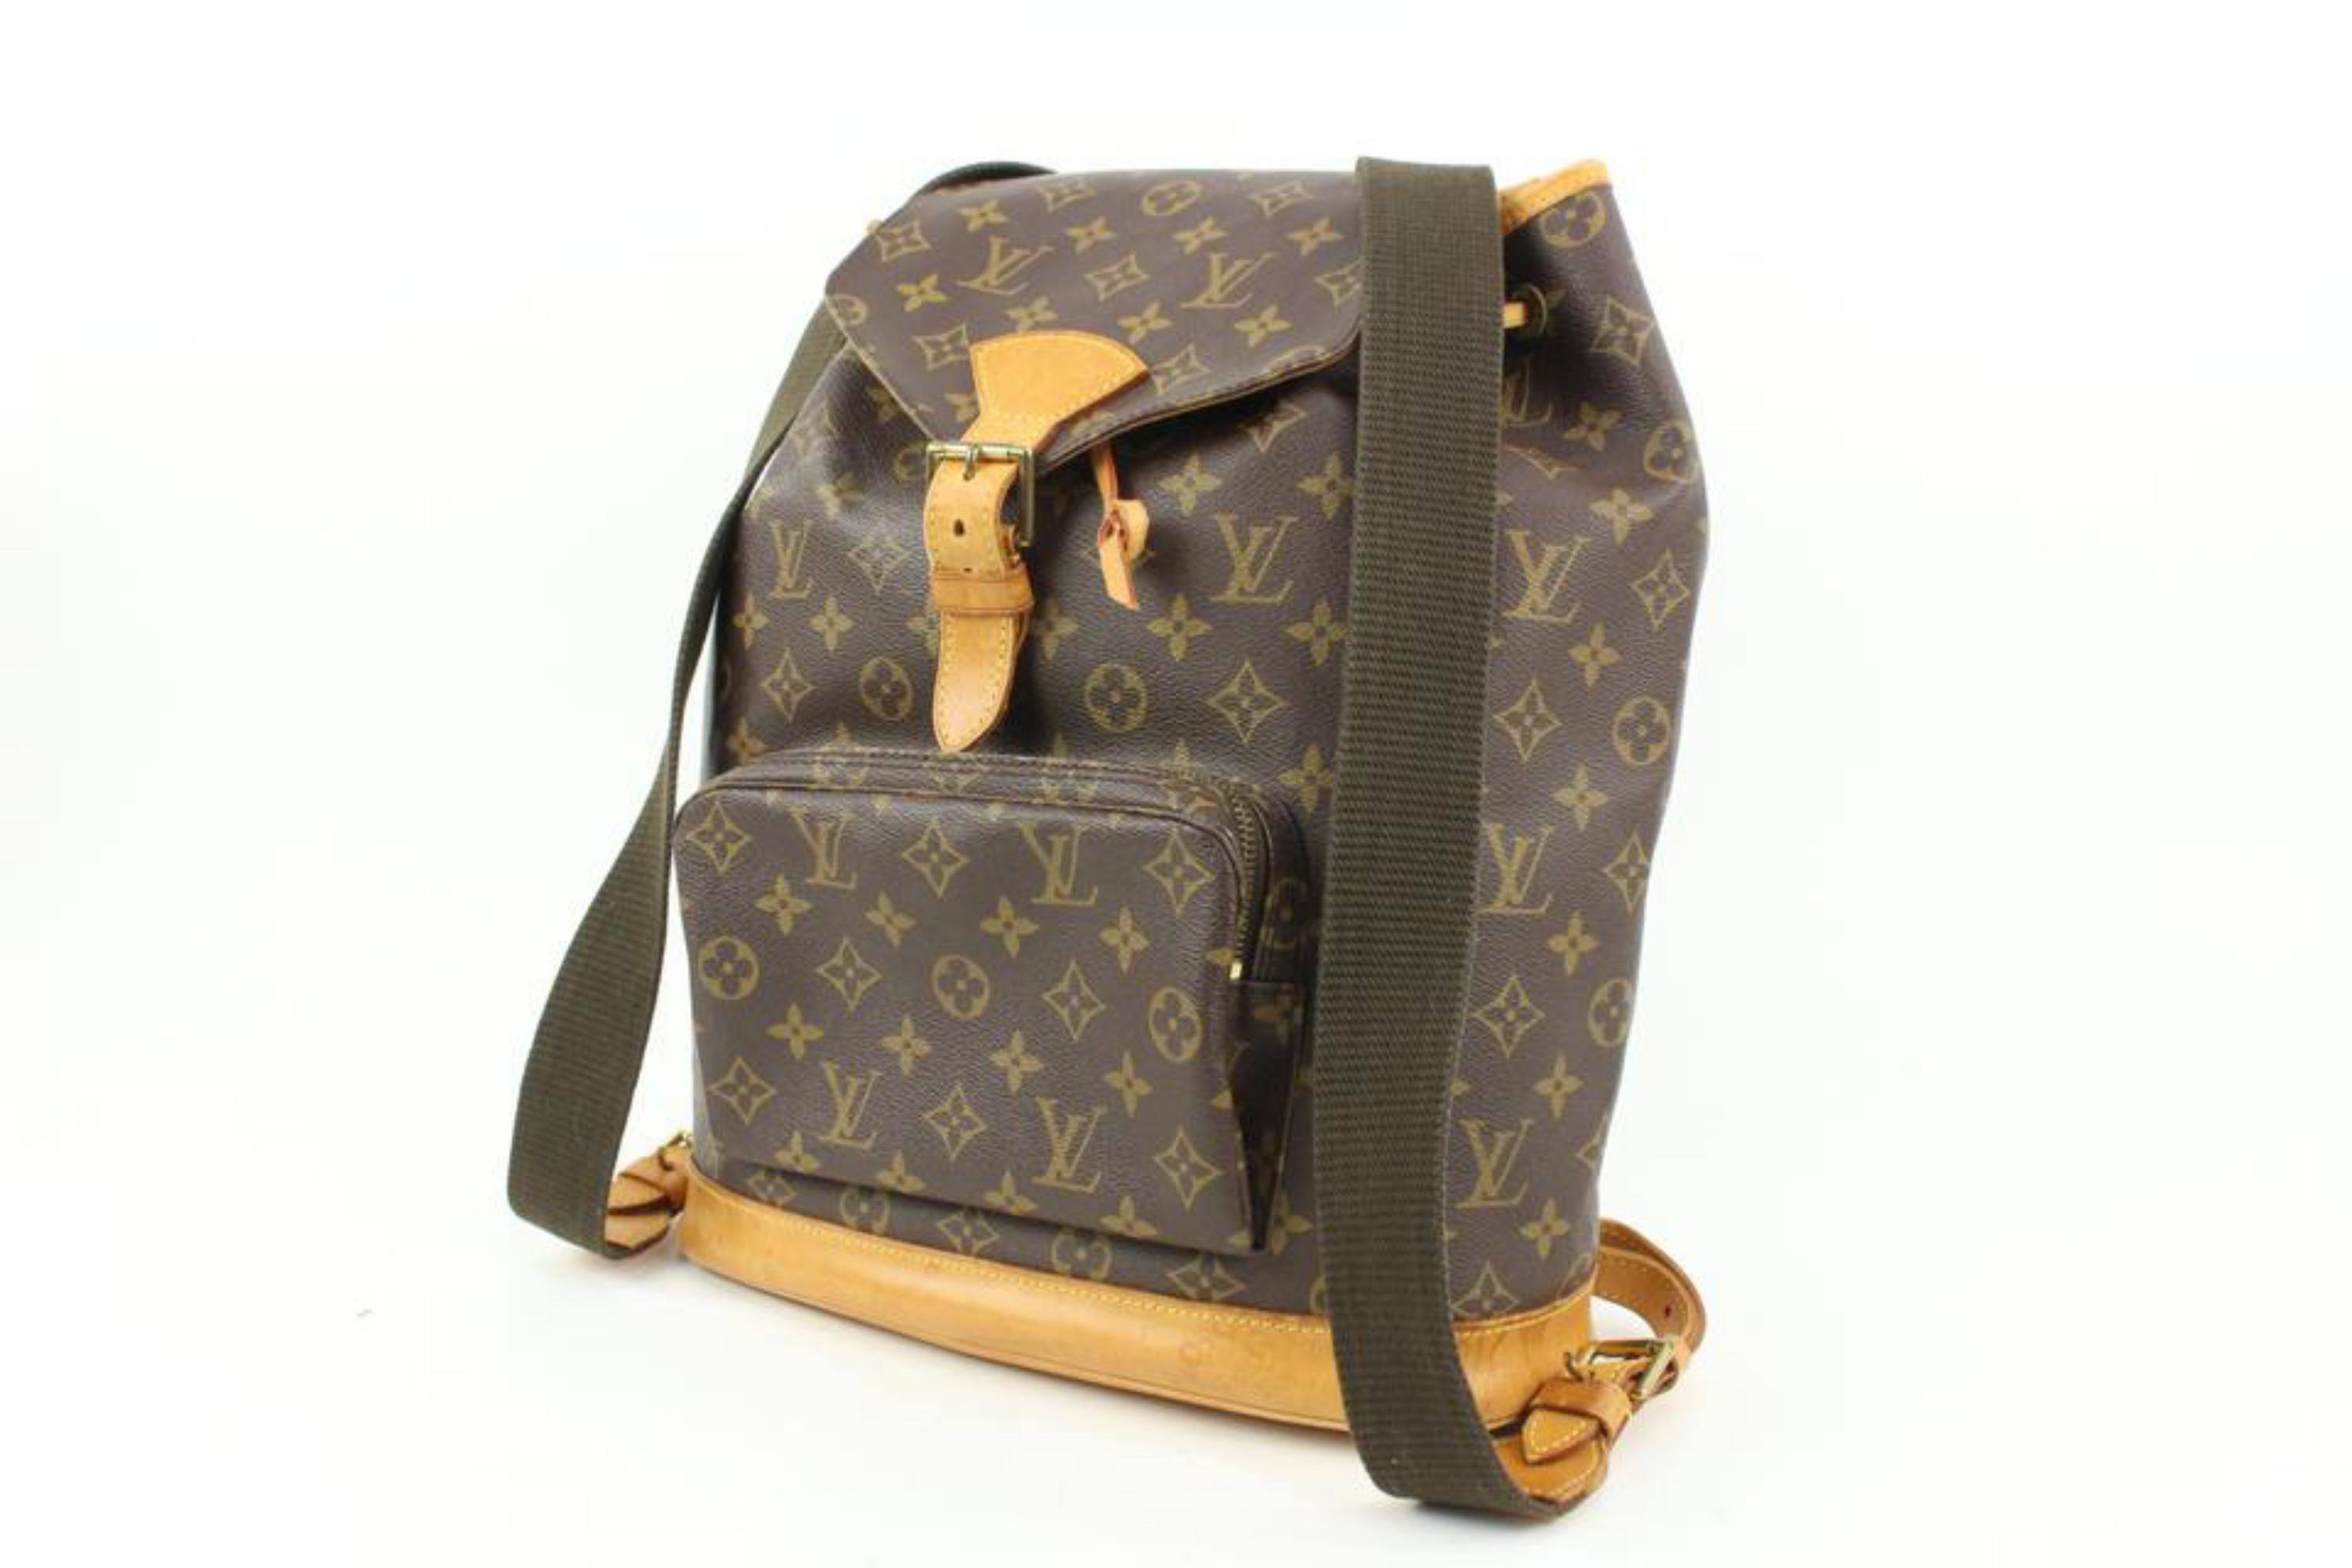 Louis Vuitton Large Monogram Montsouris GM Backpack s29lv30
Date Code/Serial Number: MI0296
Made In: France
Measurements: Length:  16